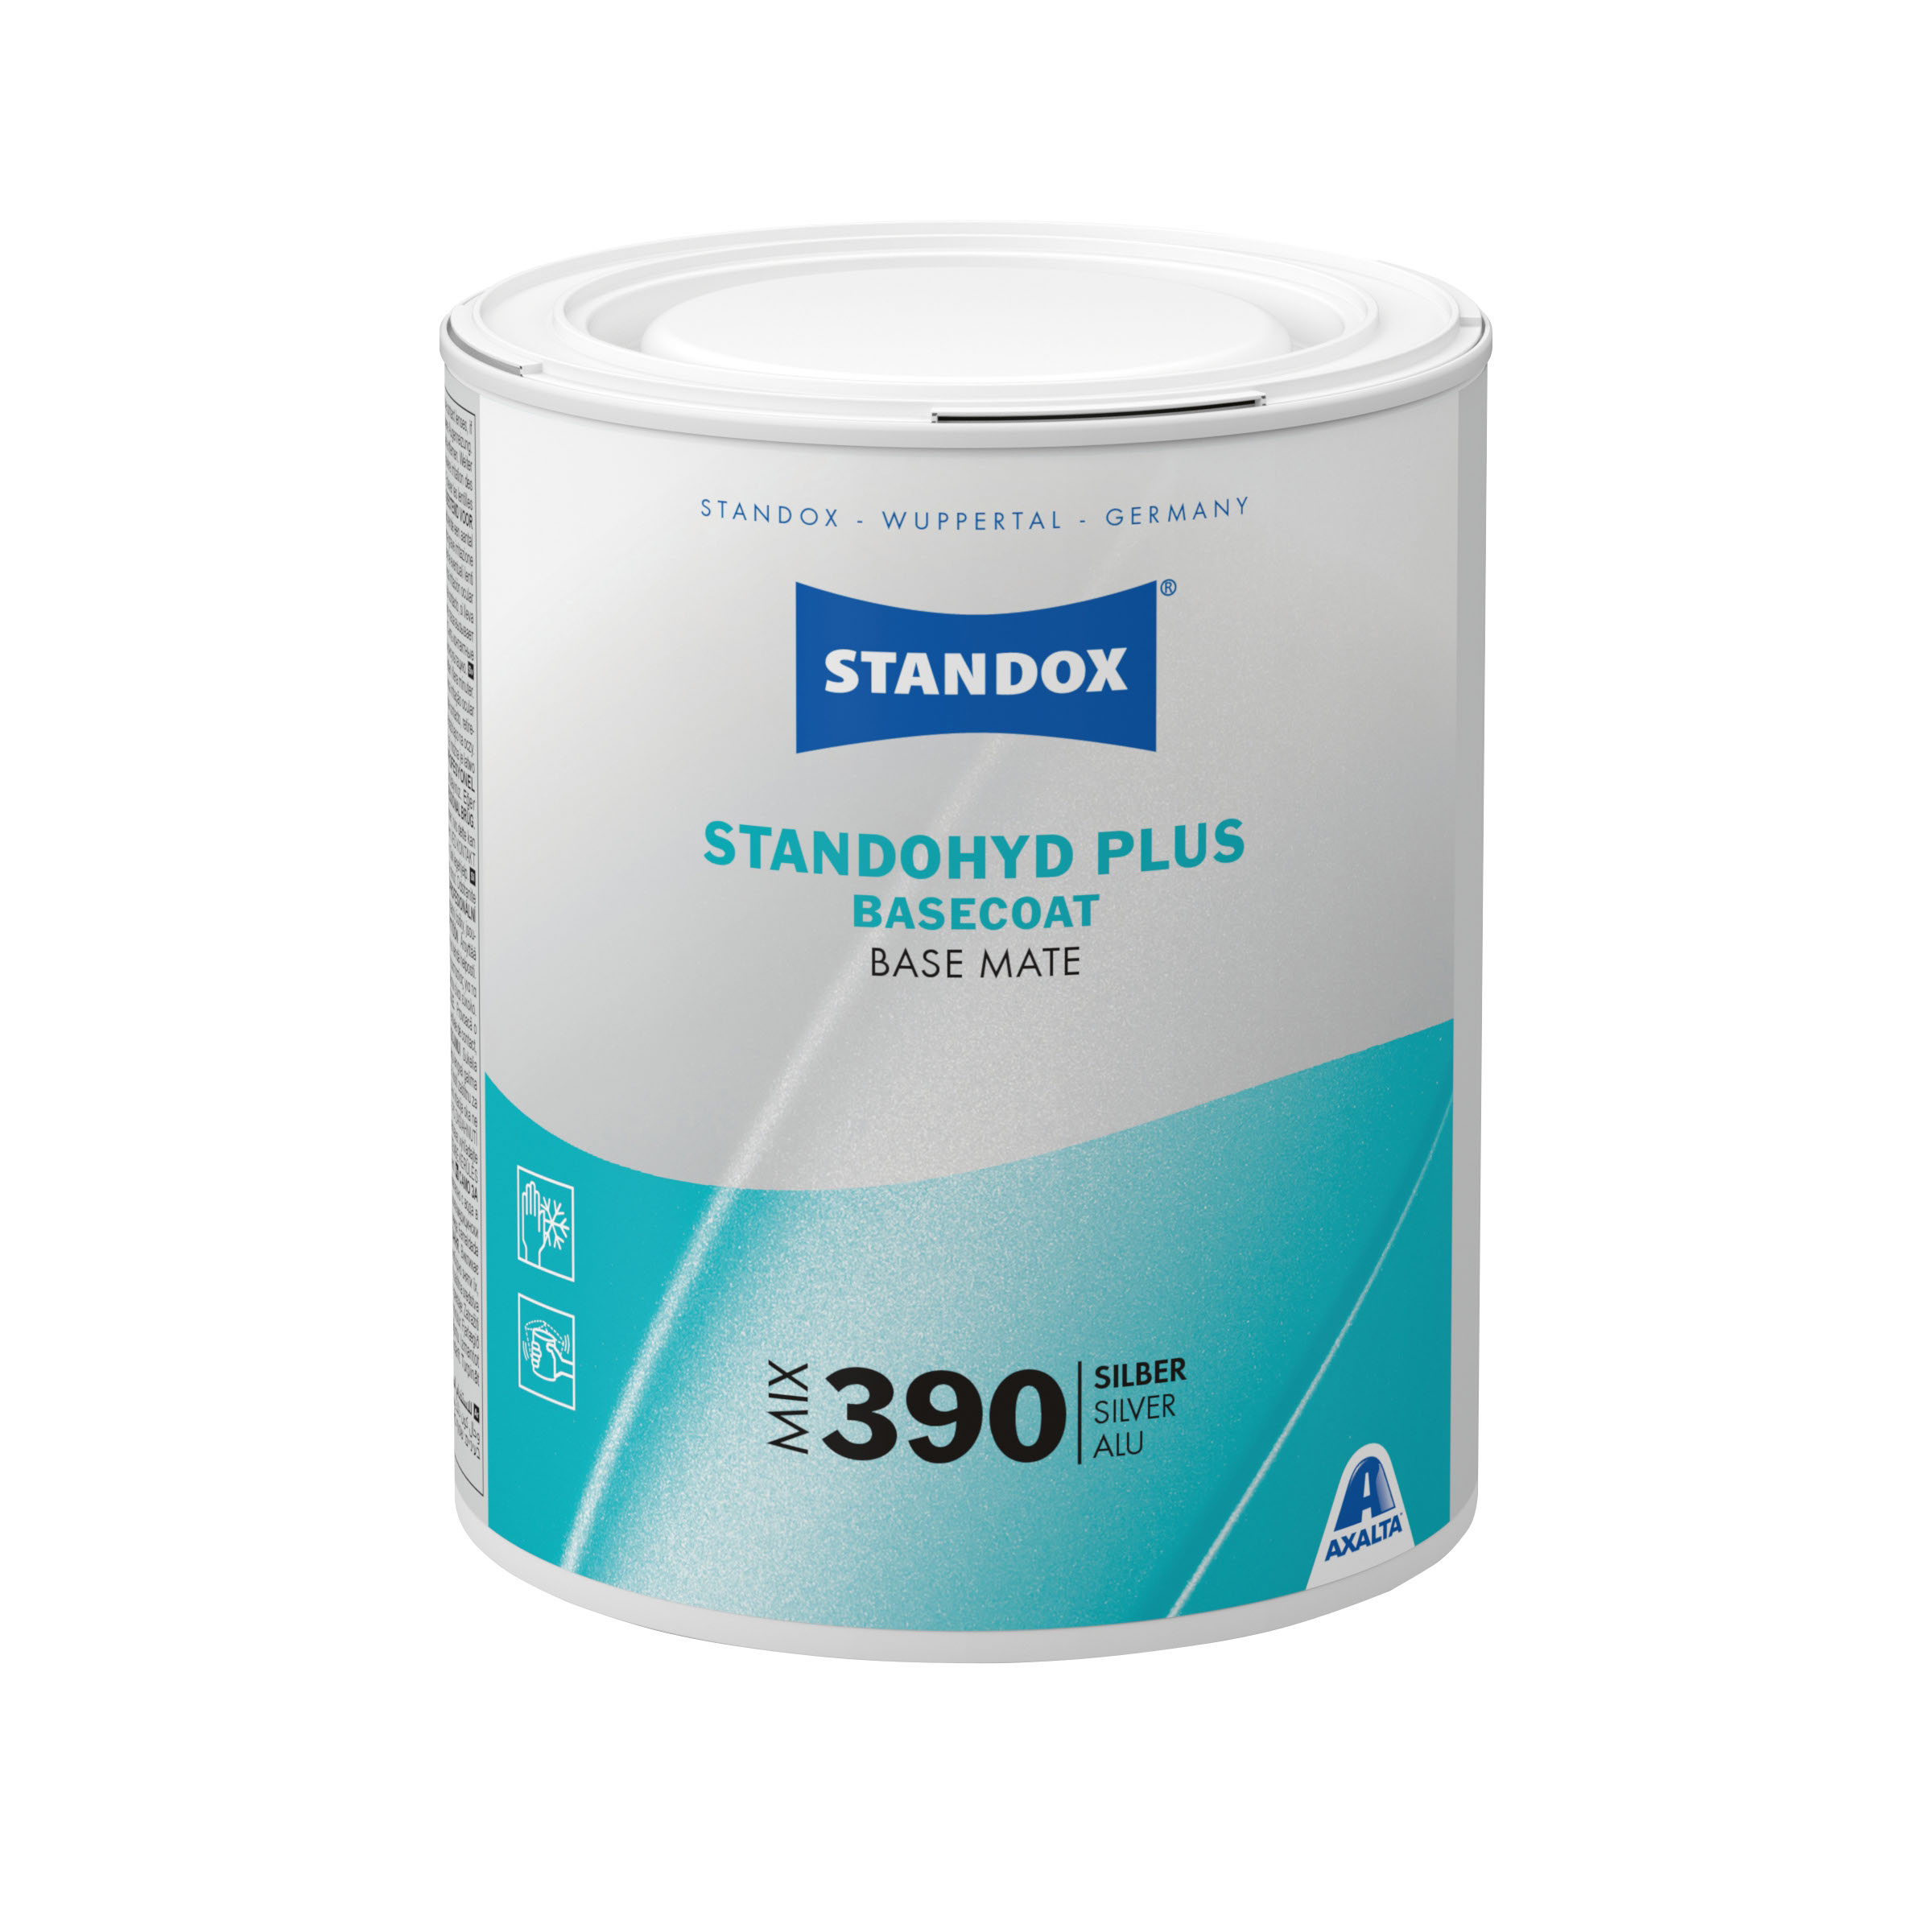 Standohyd Plus Basecoat Mix 390 silber